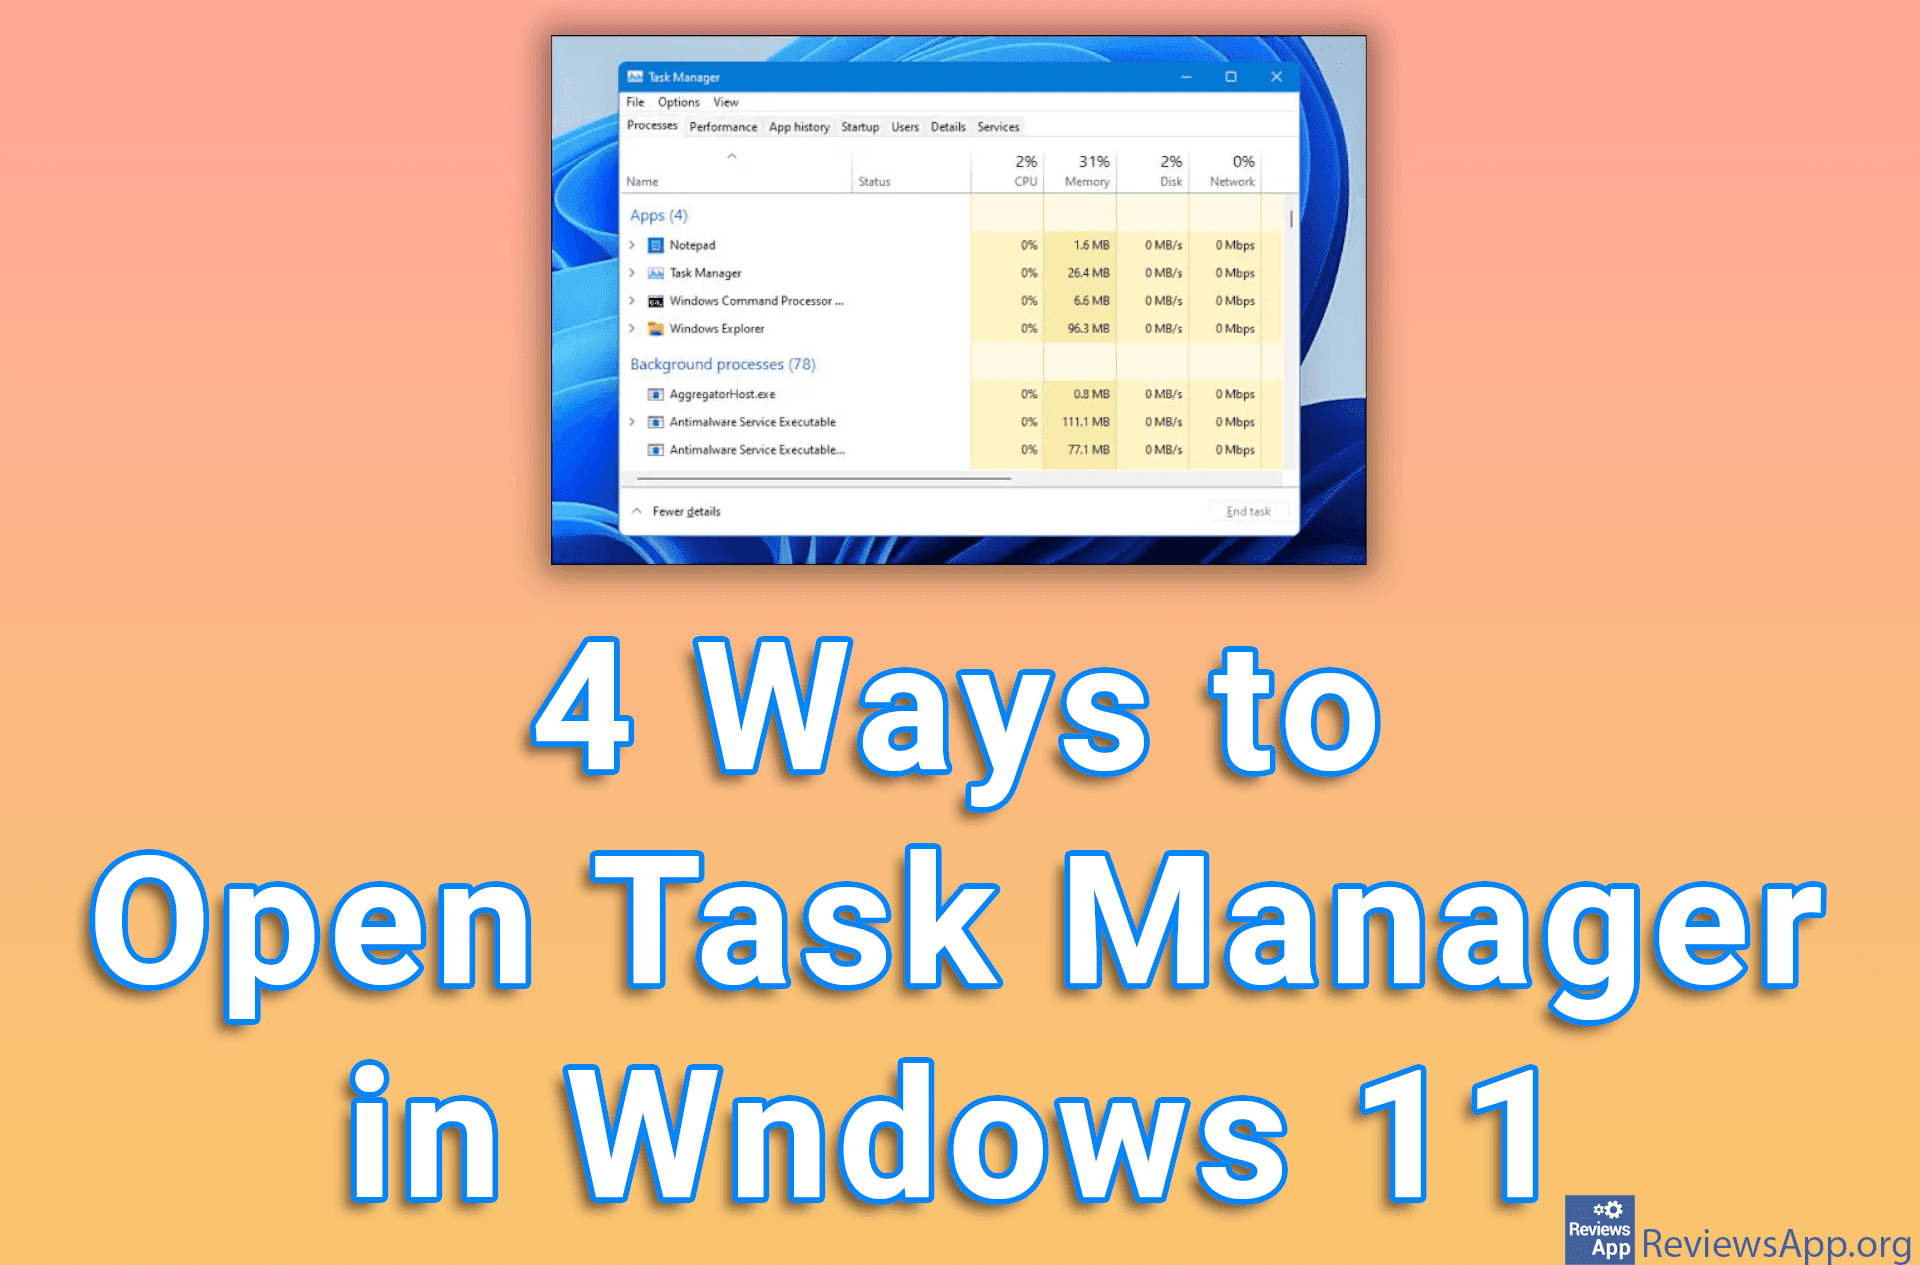 4 Ways to Open Task Manager in Windows 11